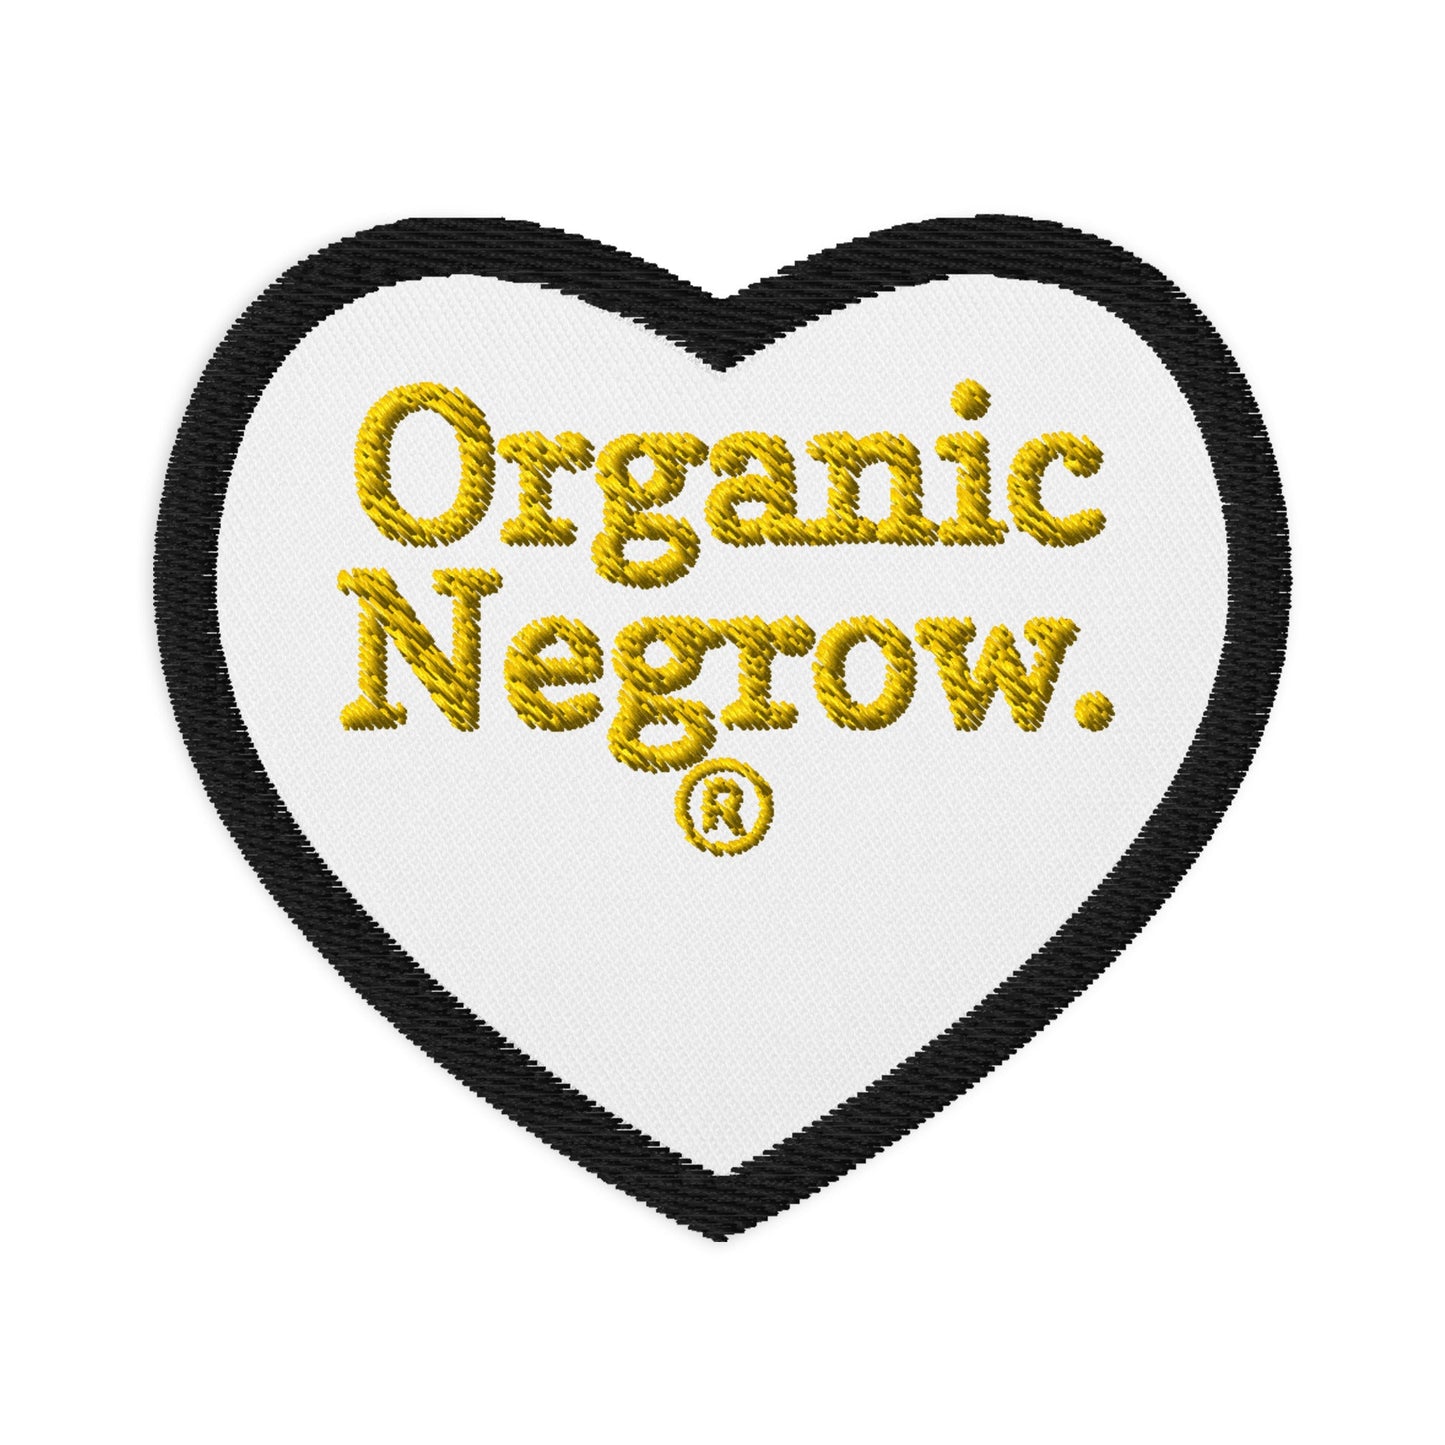 Organic Negrow Embroidered Patches / Kyrie Irving / Embroidered Patche